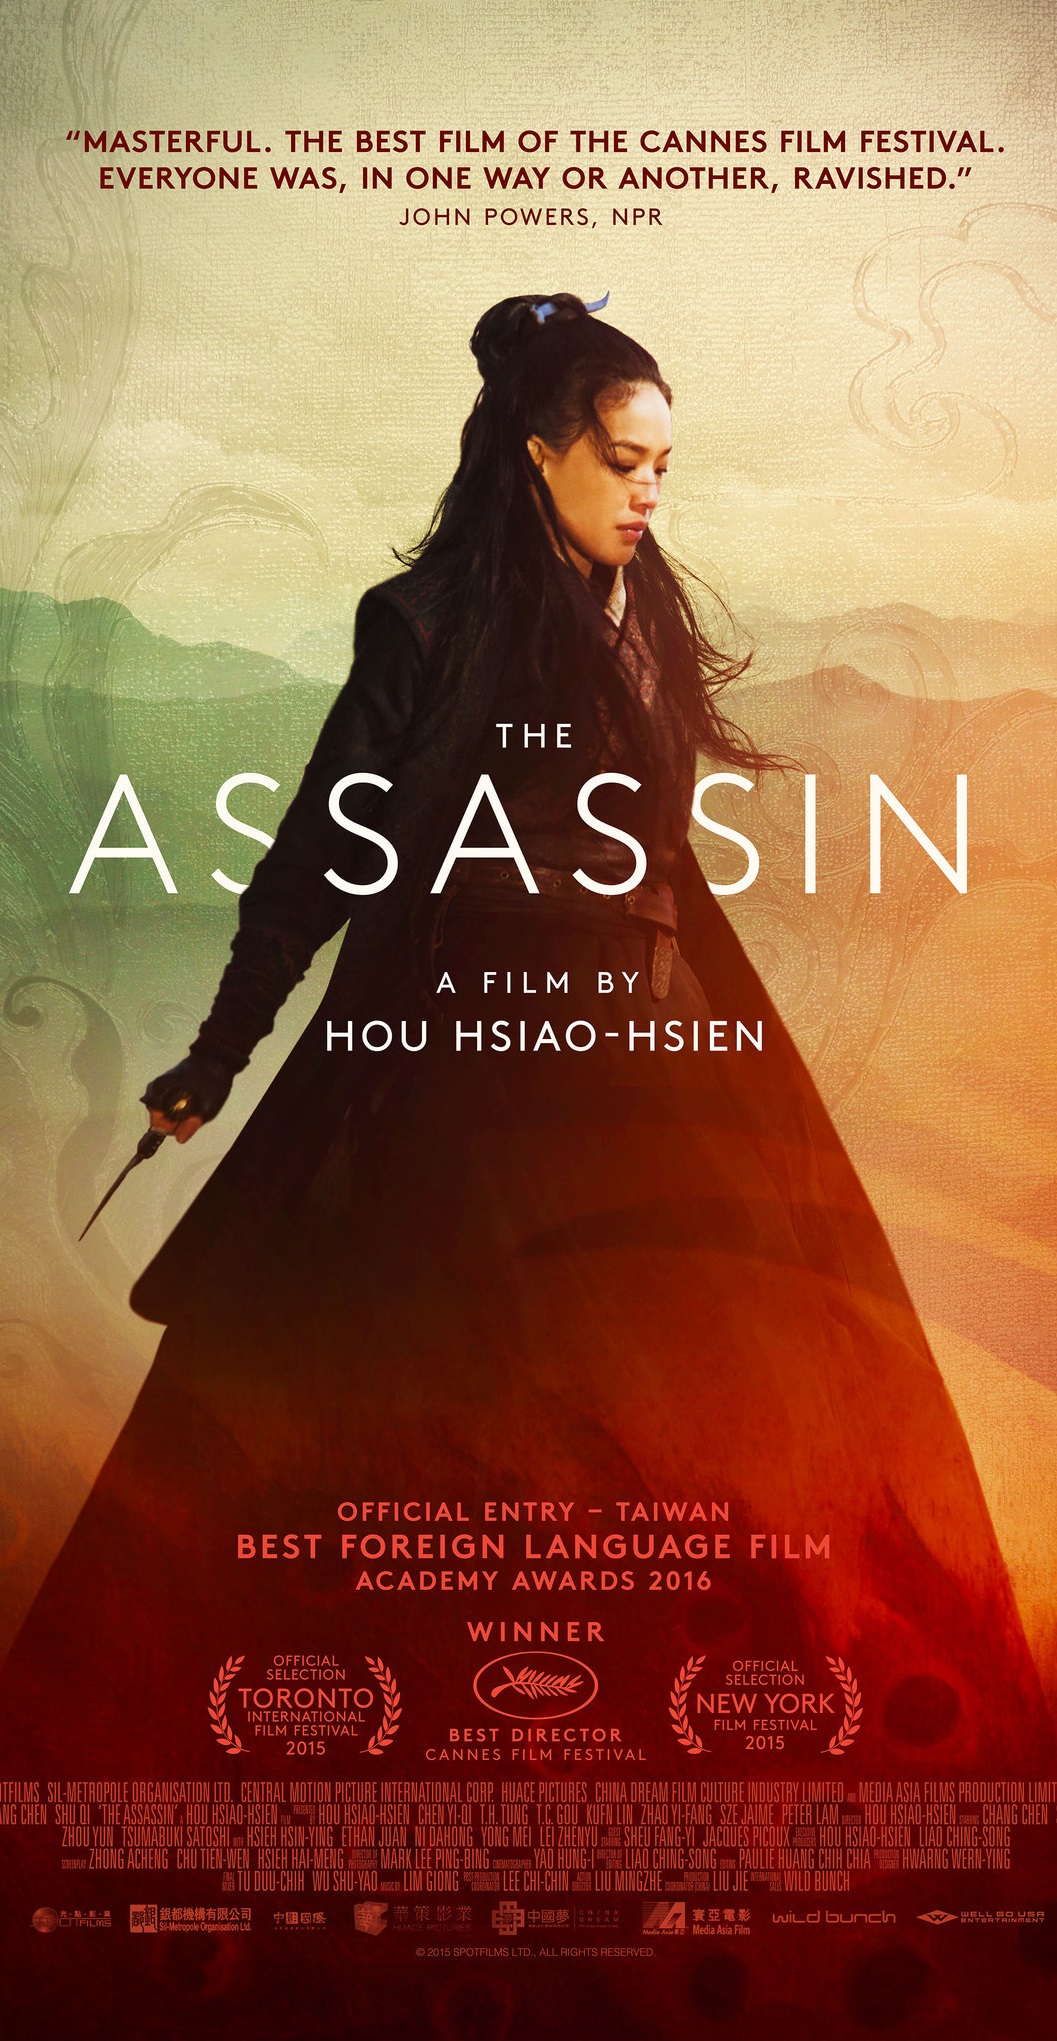 The Assassin 2015 Tamil Dubbed Drama Movie Online